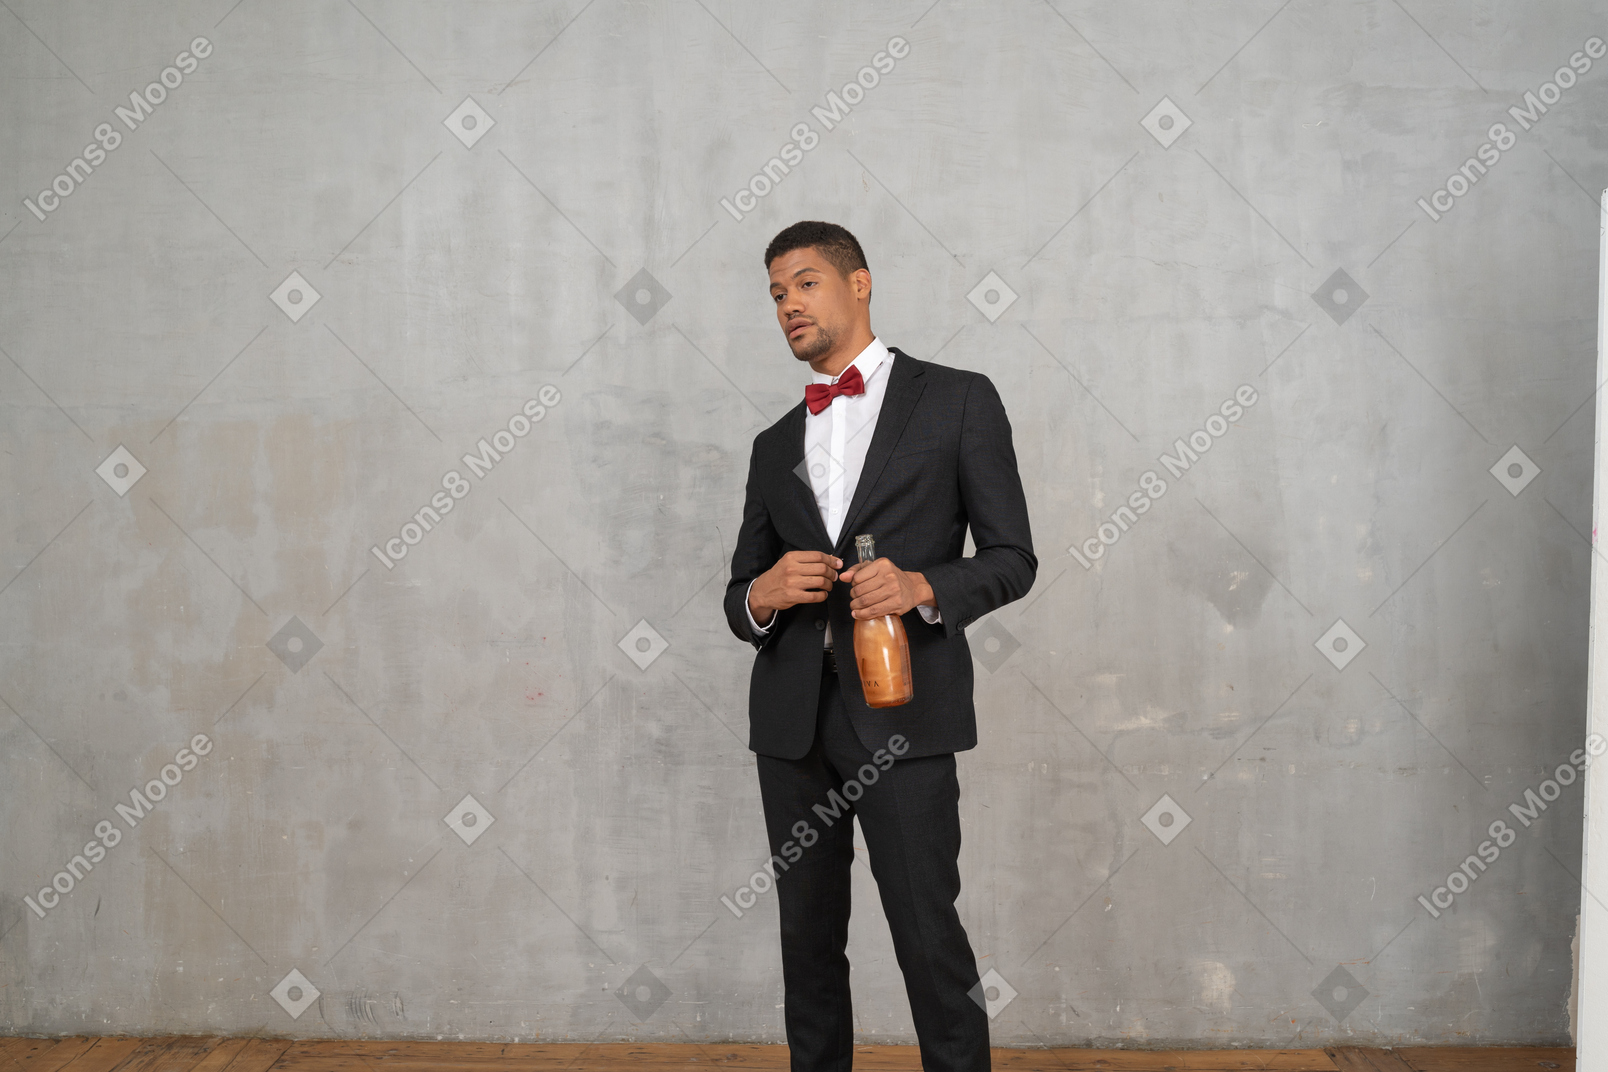 Man in suit and bow tie standing with a bottle in his hand